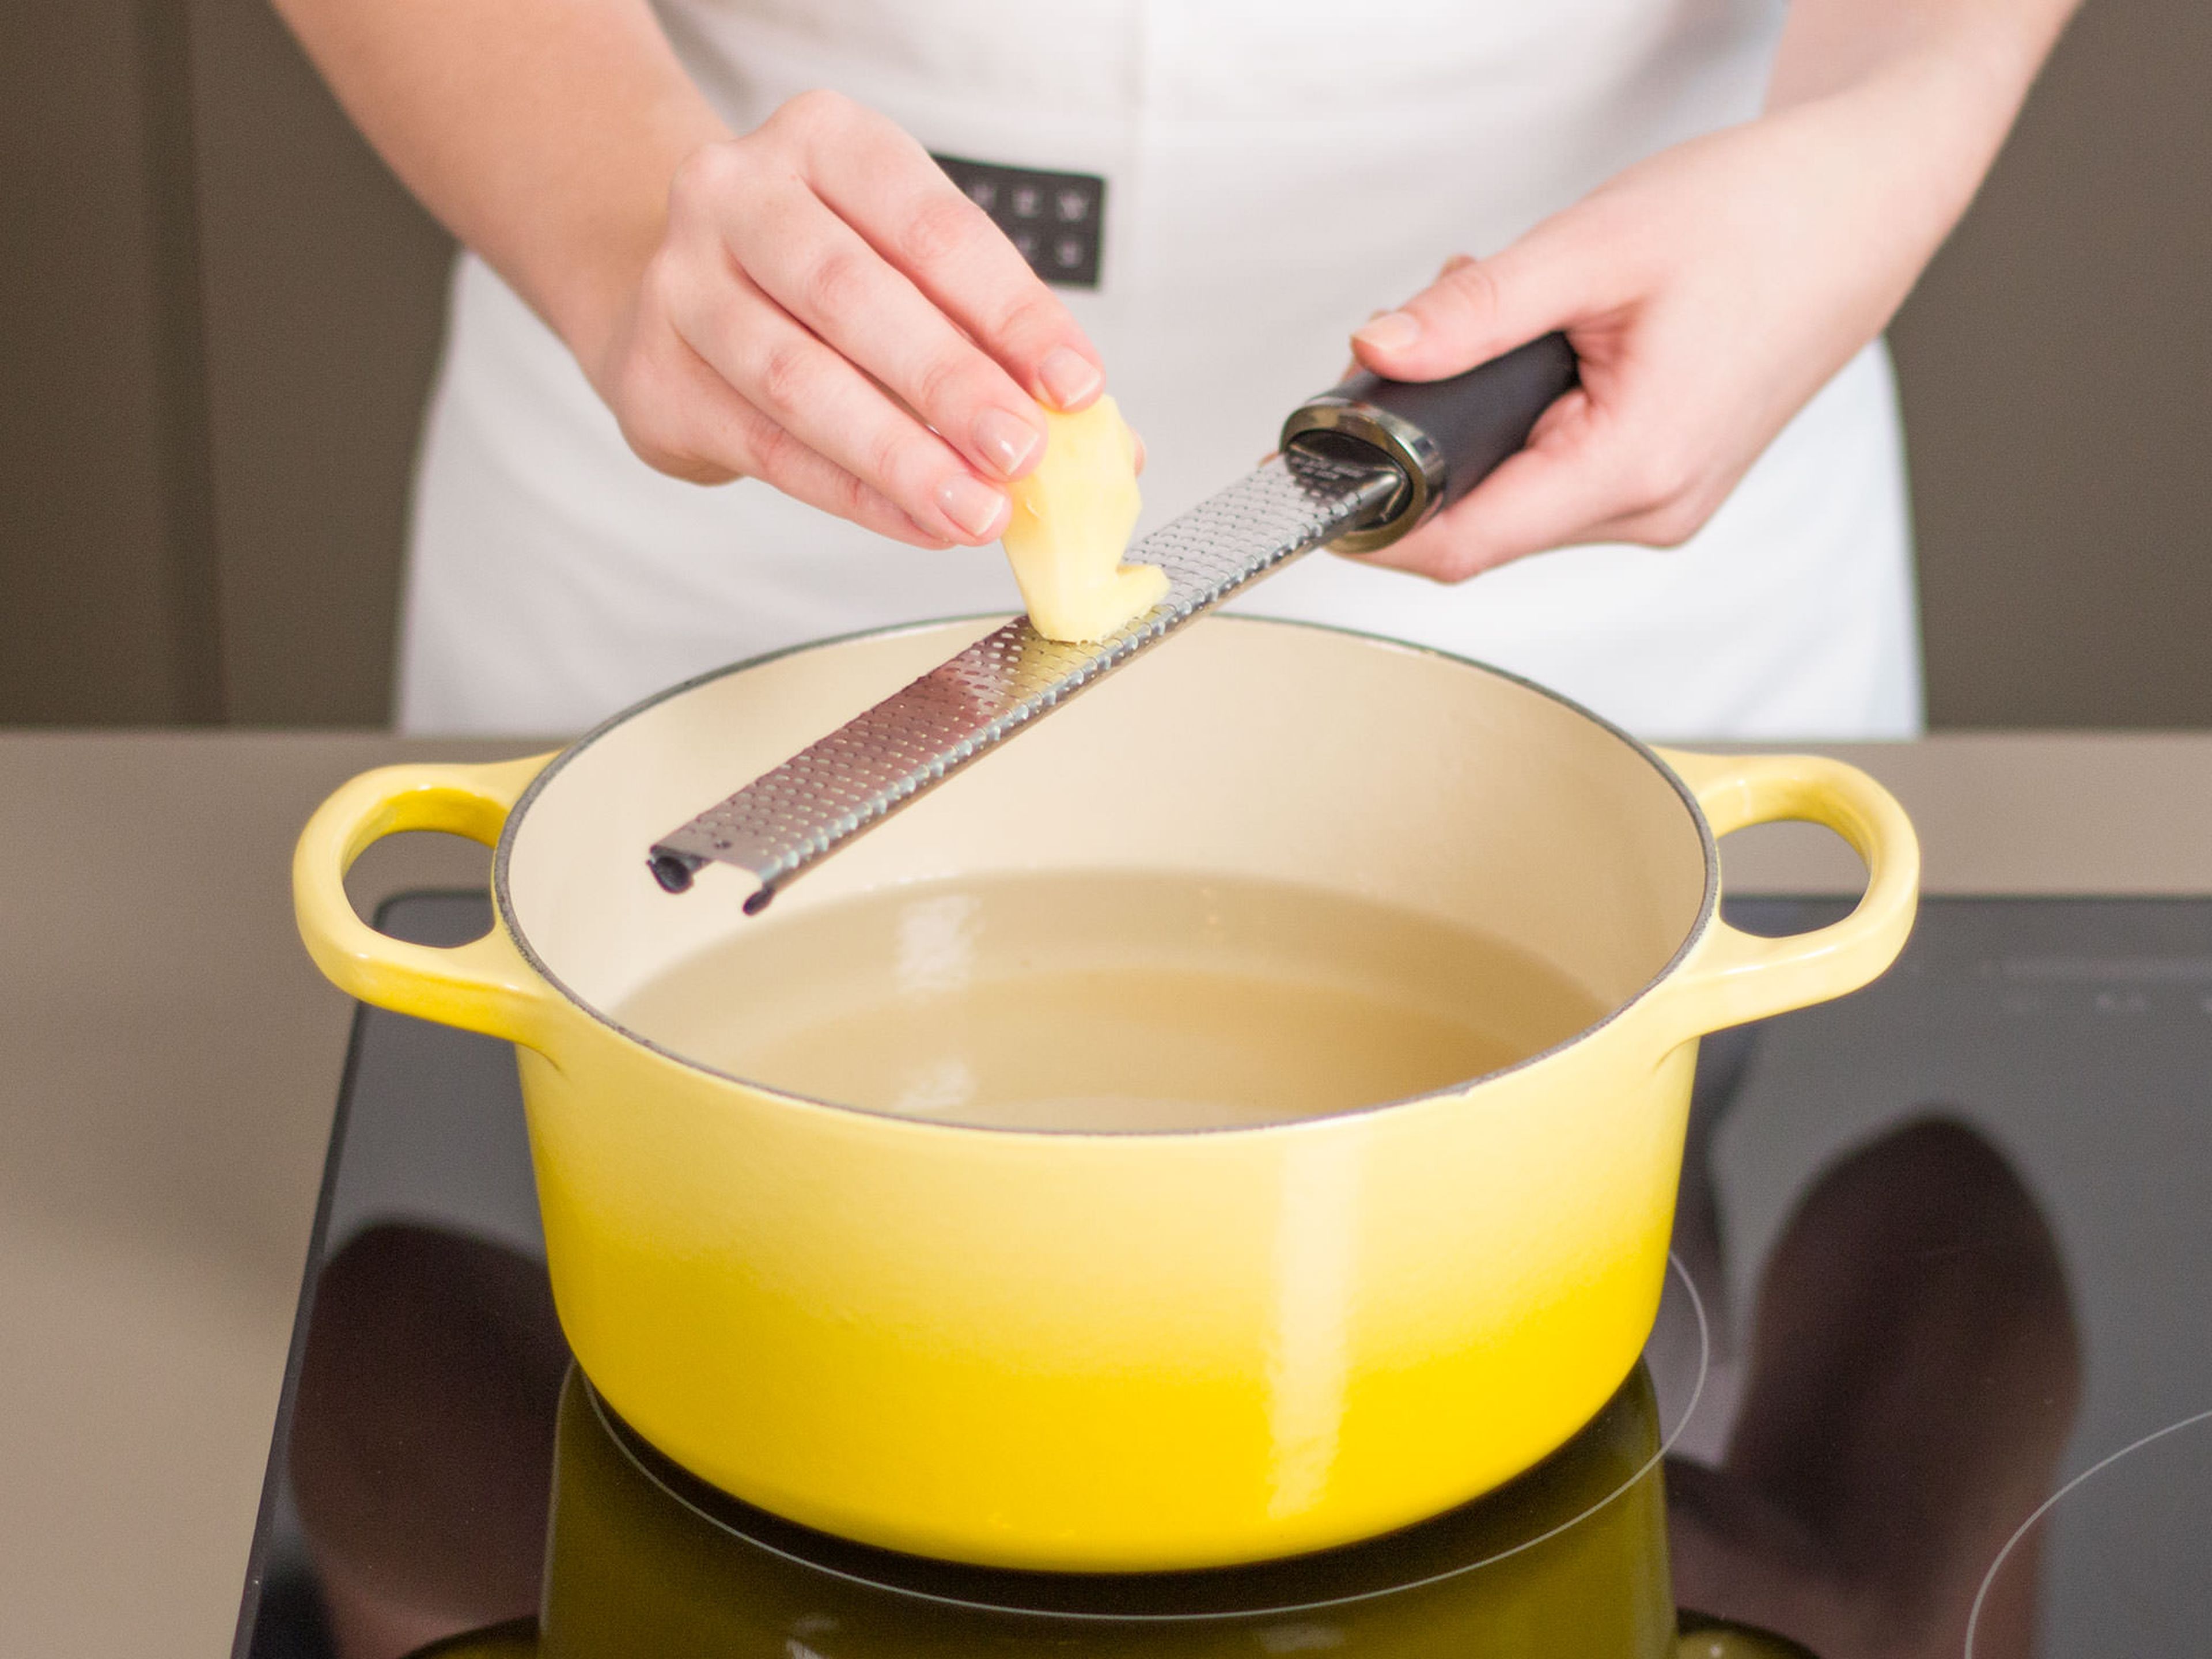 Bring water and sugar to a boil in a large saucepan over high heat. Grate ginger into pan and cook for approx. 1 – 2 min.